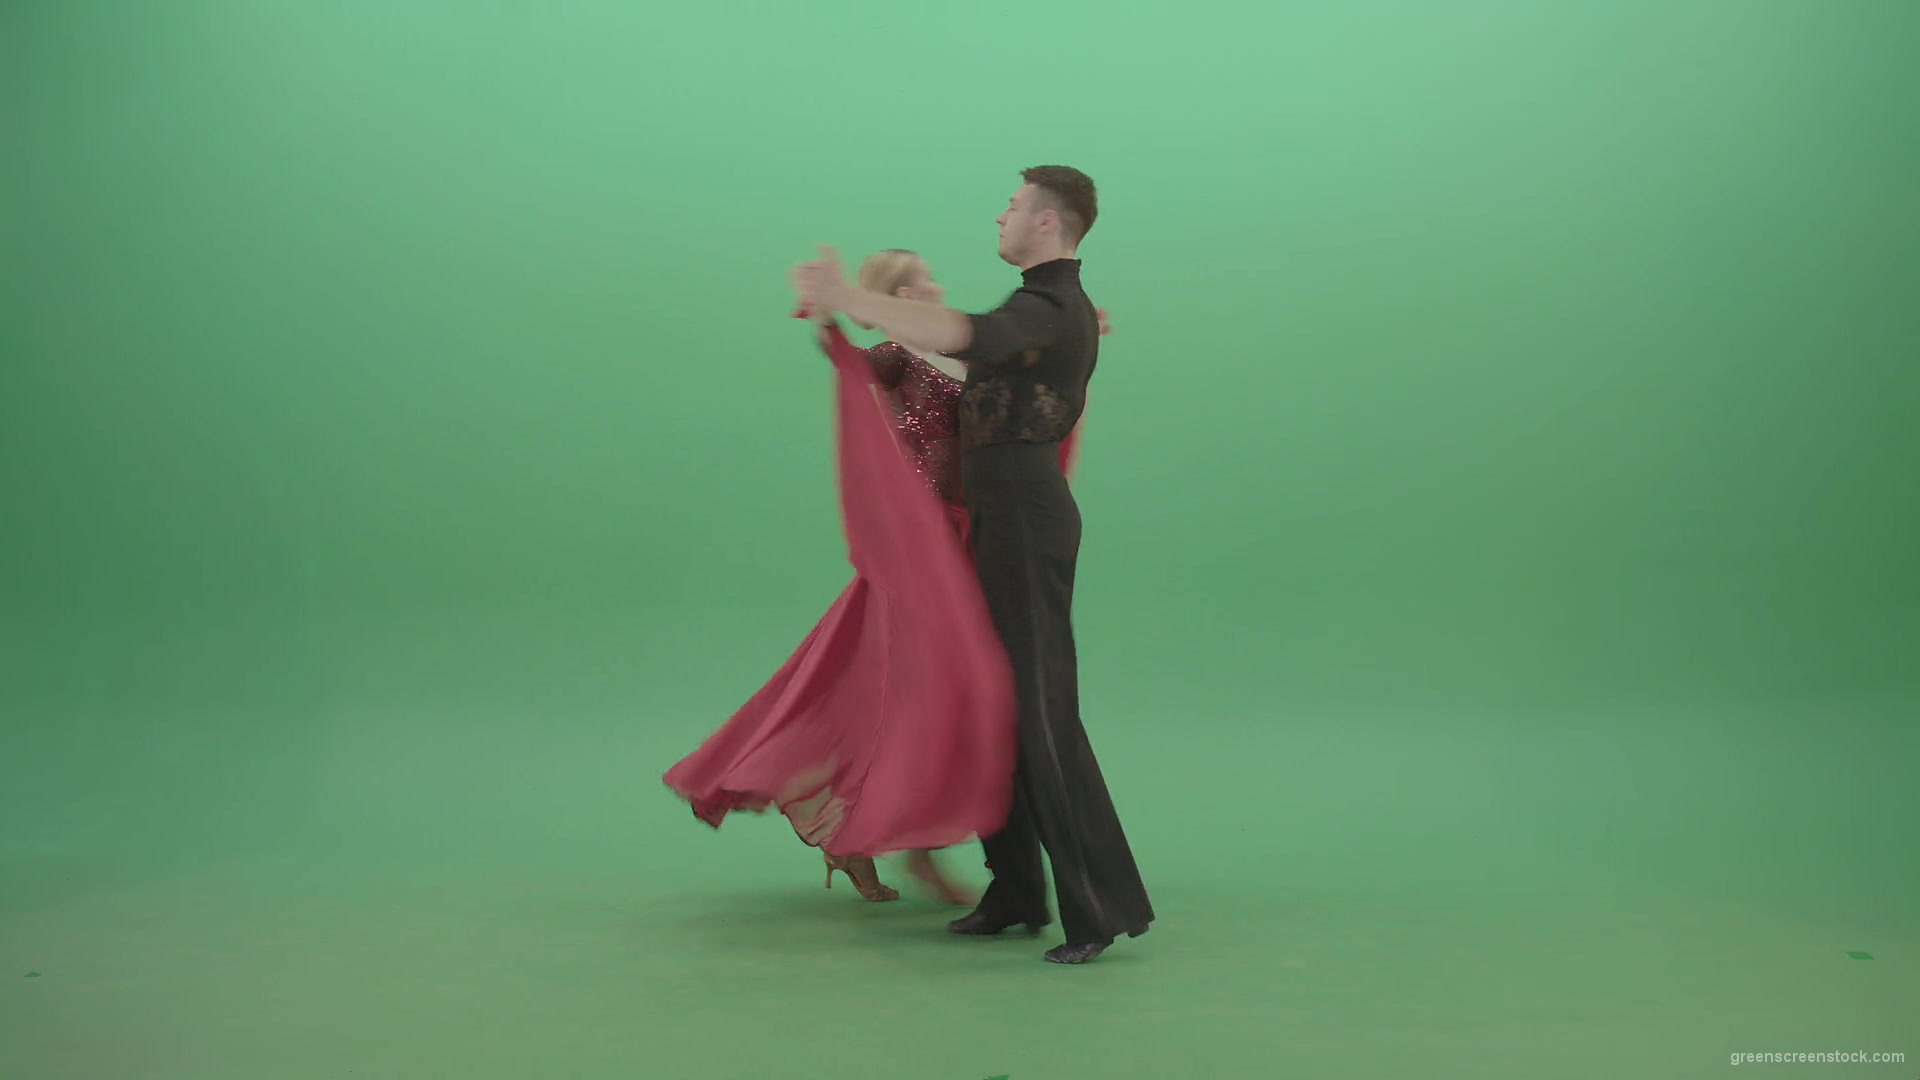 Young-couple-in-red-black-costume-spinning-dancing-ballroom-latina-dance-over-green-screen-4K-Video-Footage-1920_008 Green Screen Stock